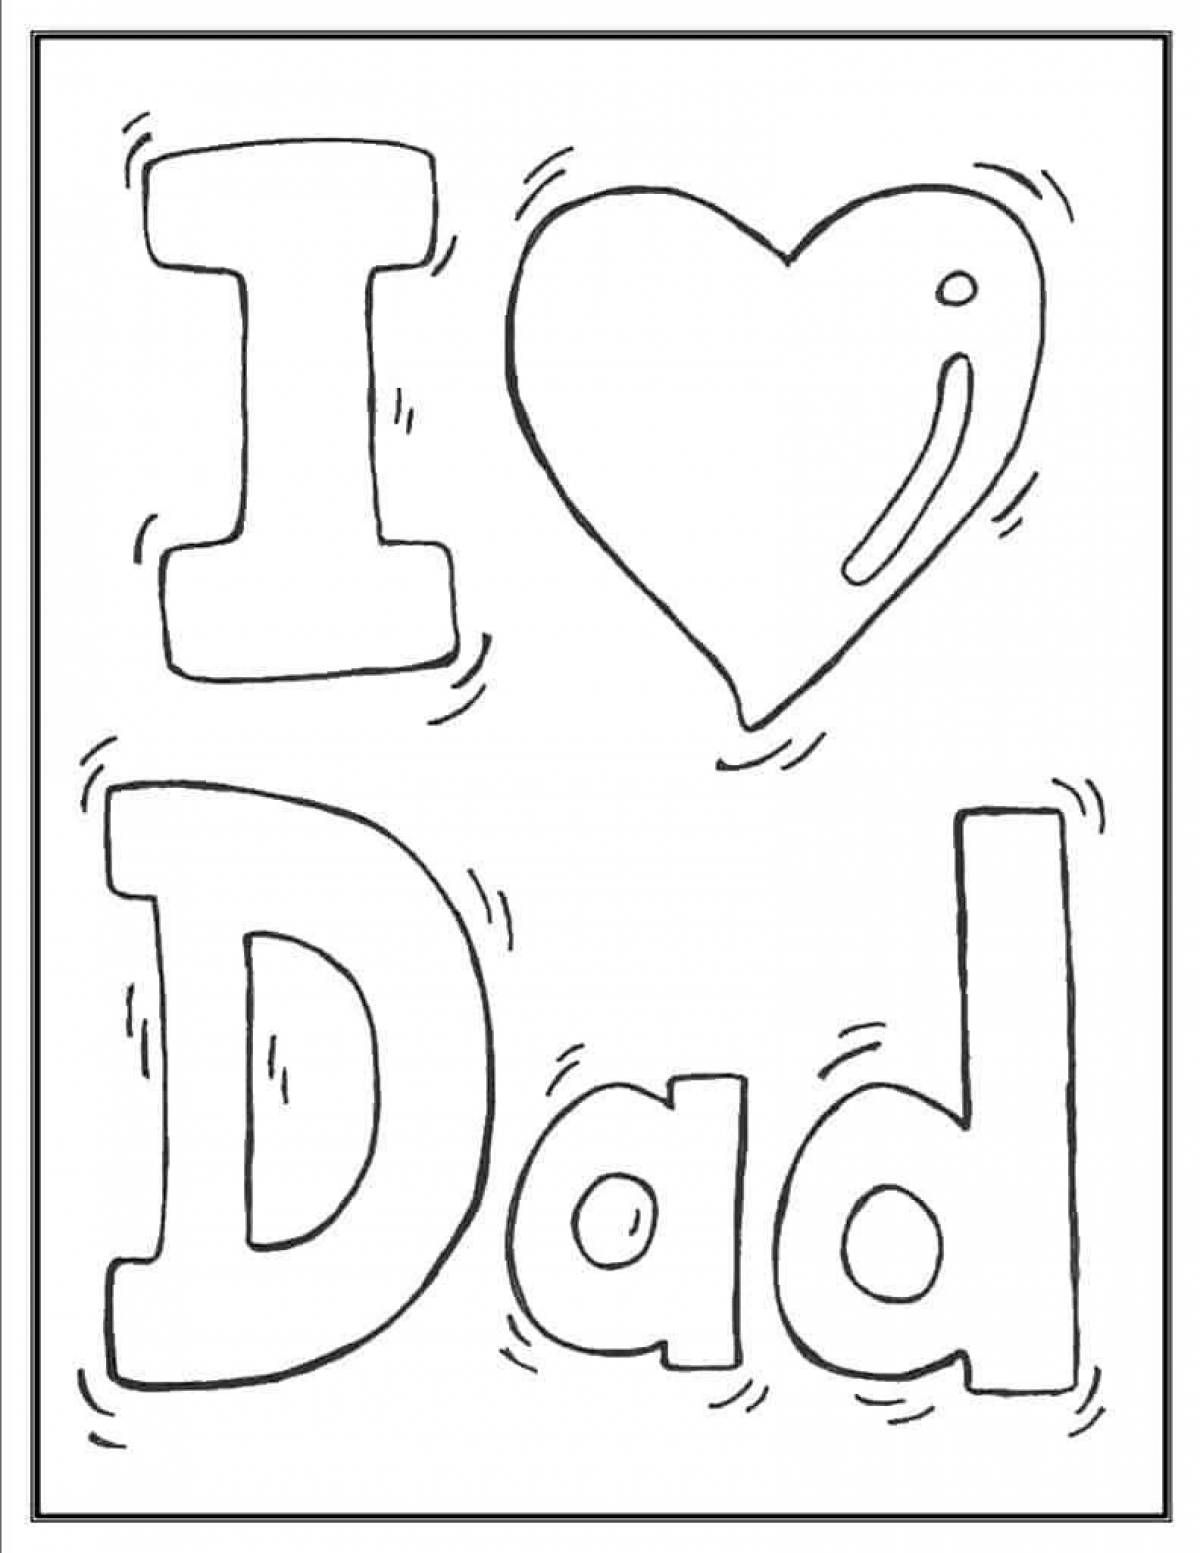 Great happy birthday coloring for dad from son